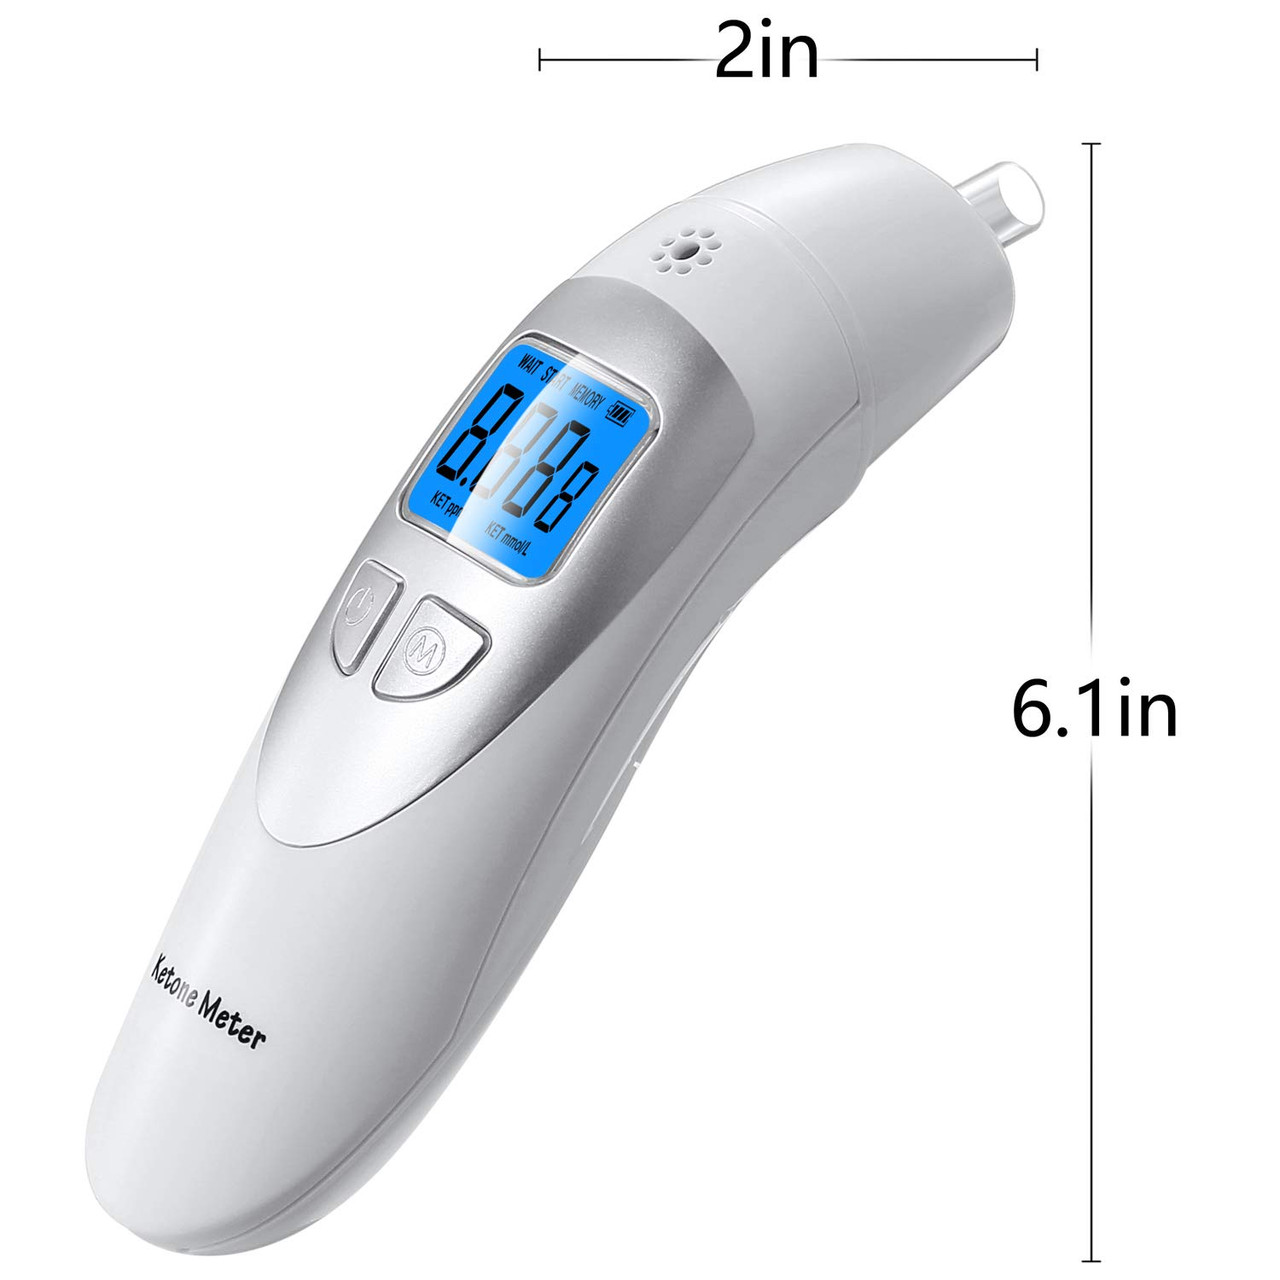 Ketone Monitor with New Technology Semi-Conductor Sensor to Test The Ketone  Content by Breath